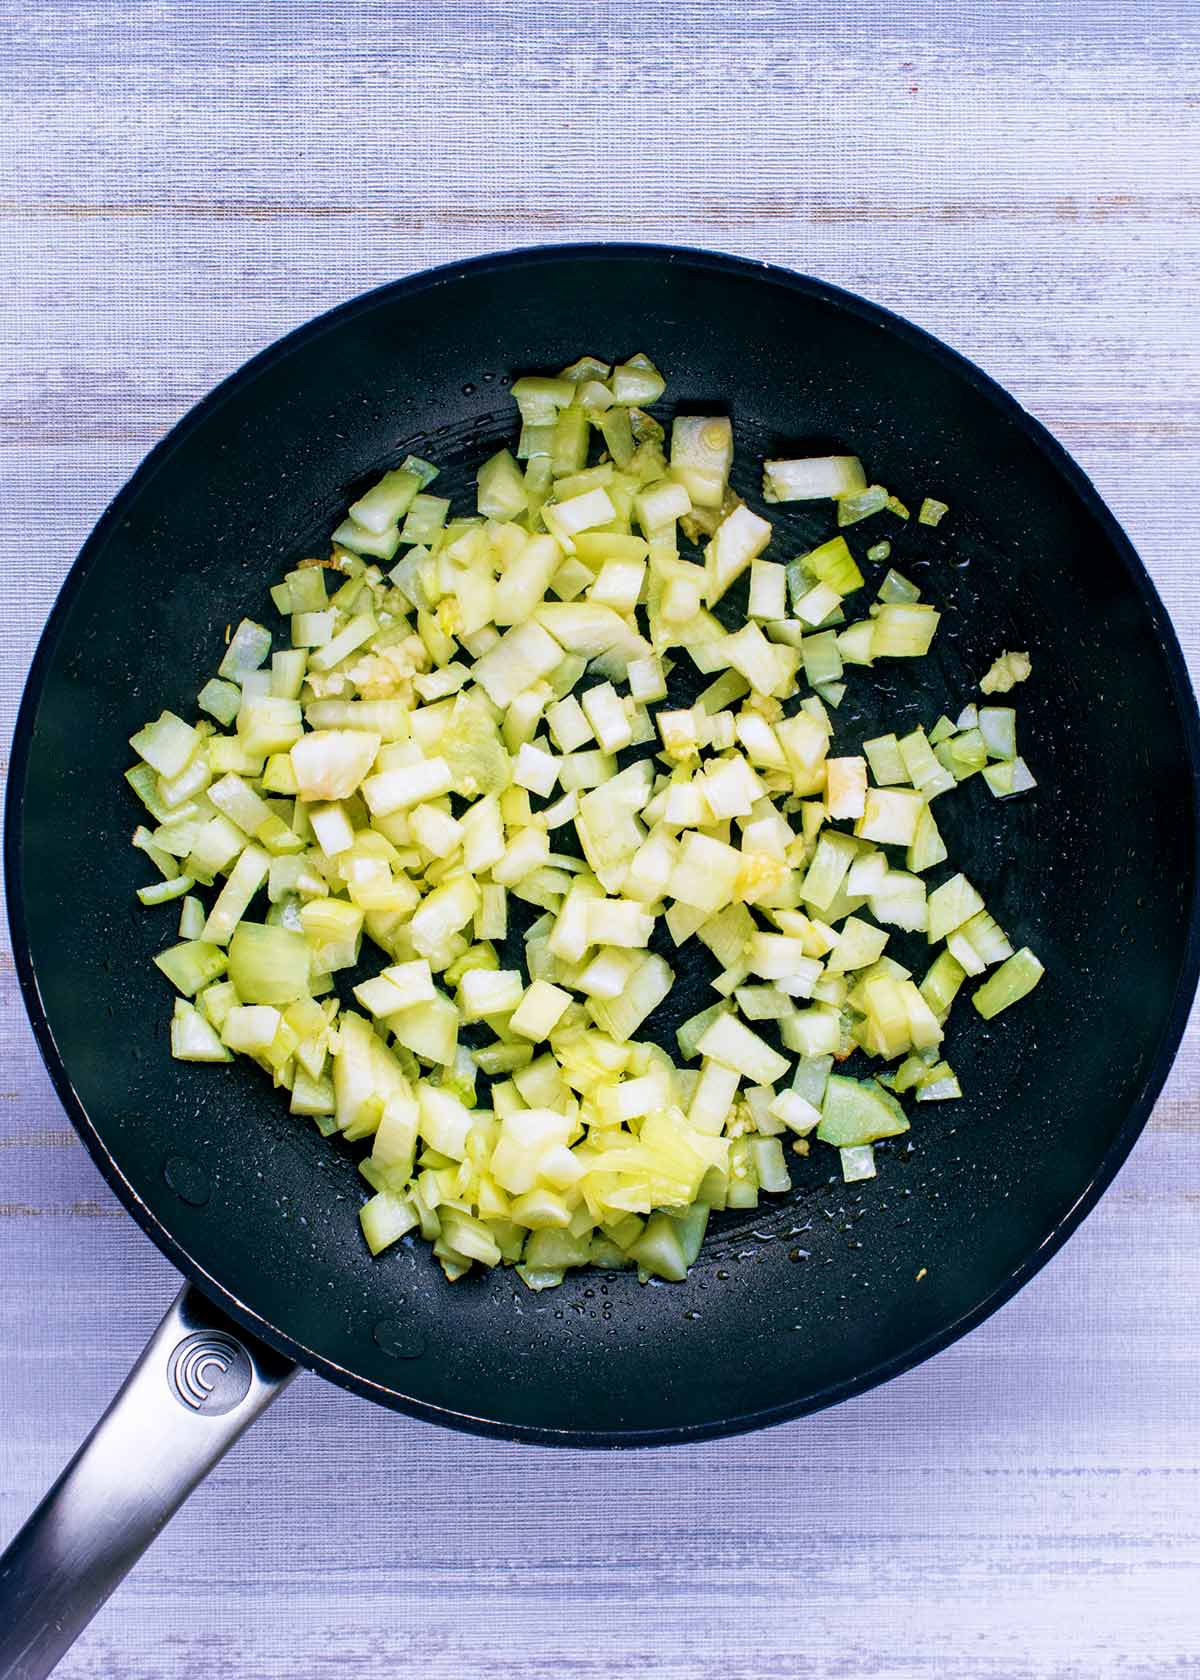 A black frying ban with chopped onions in it.